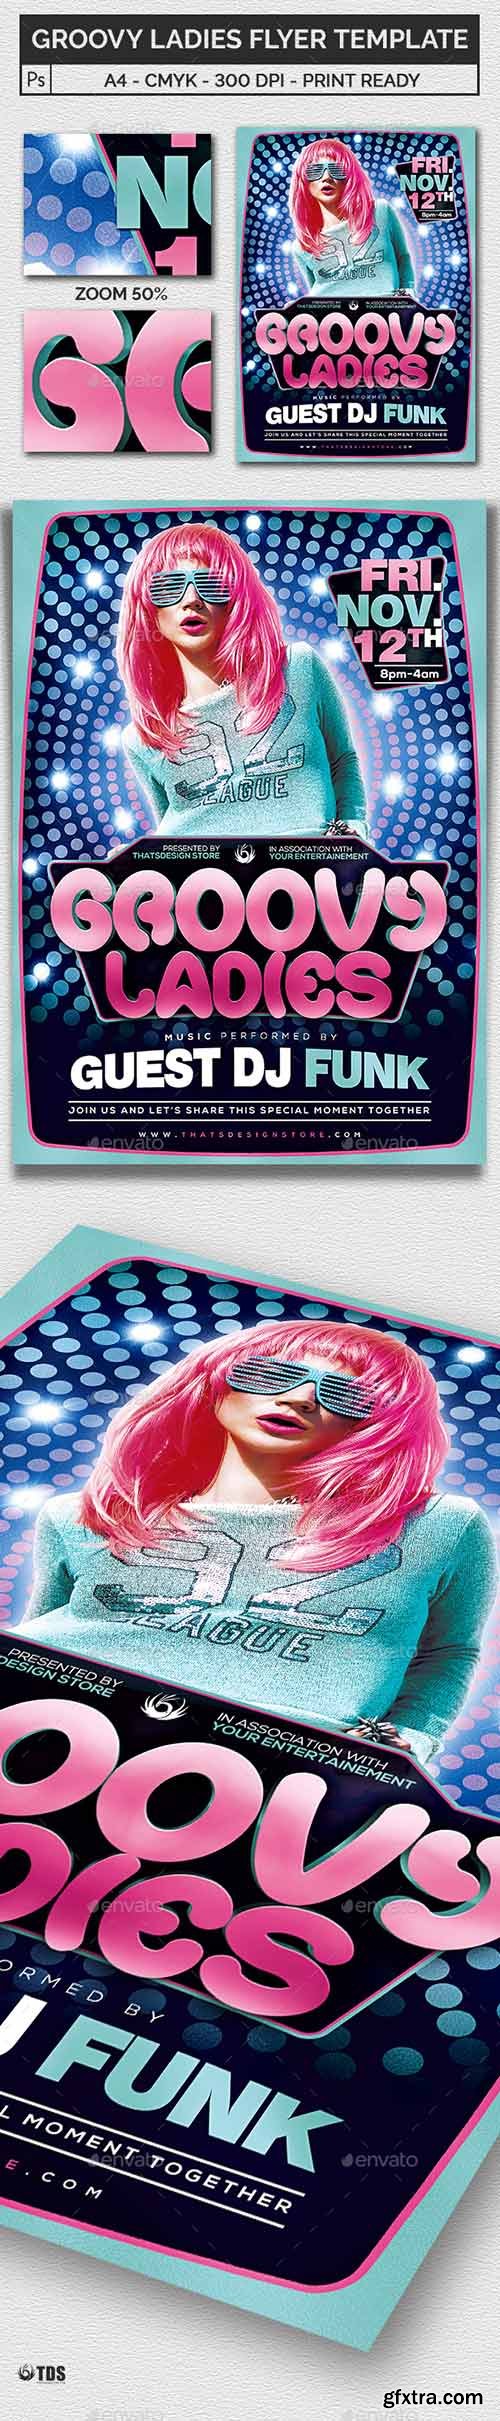 Graphicriver - Groovy Ladies Flyer Template 18602793